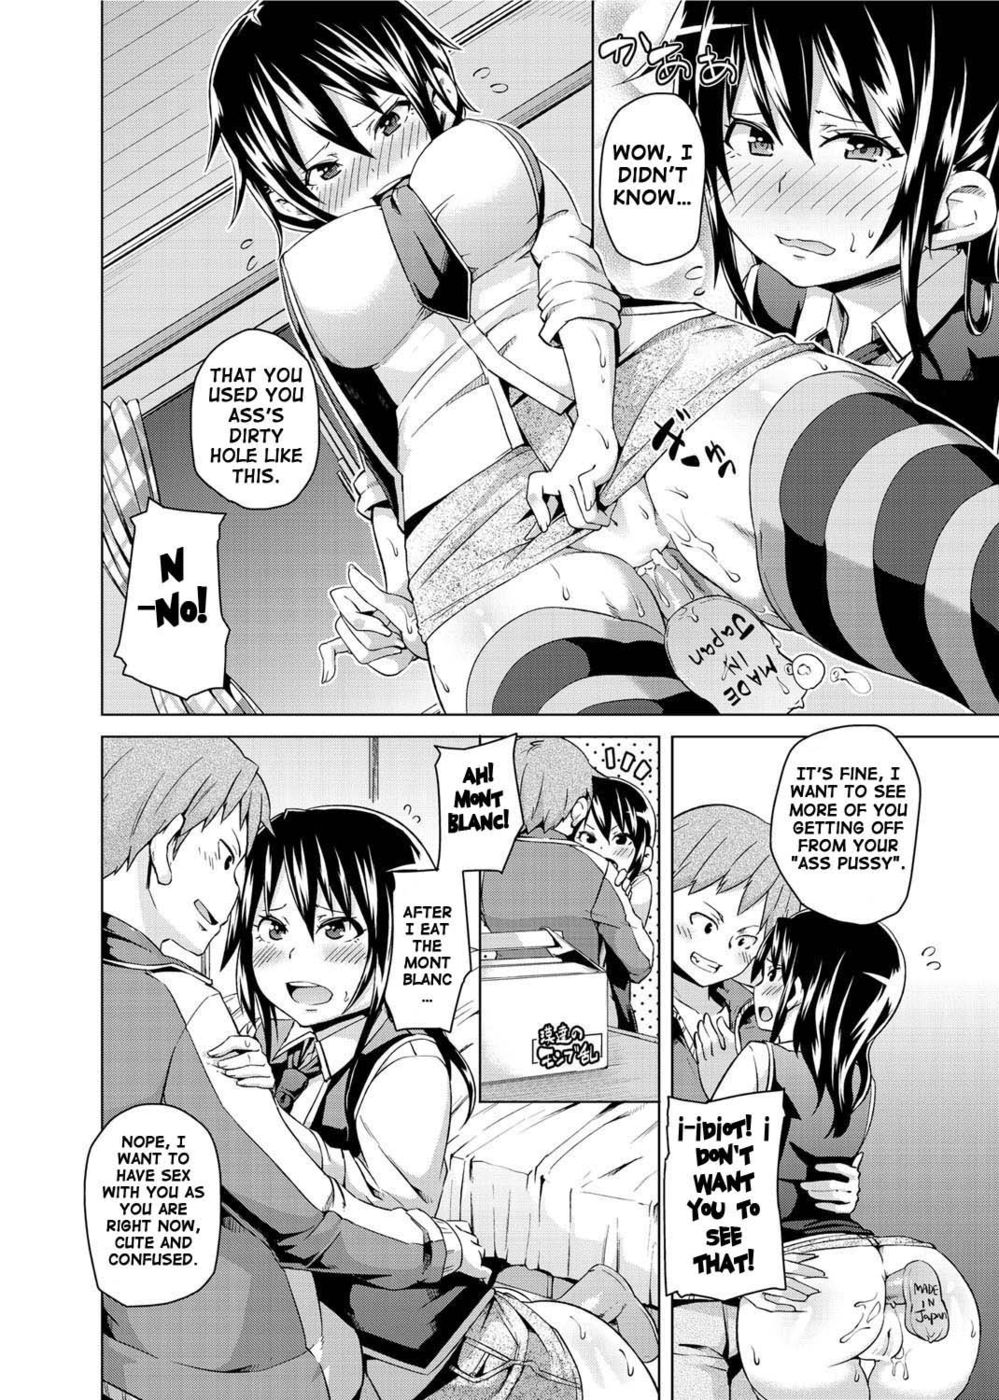 Hentai Manga Comic-Cheating Should Be Done With The Ass-Read-6